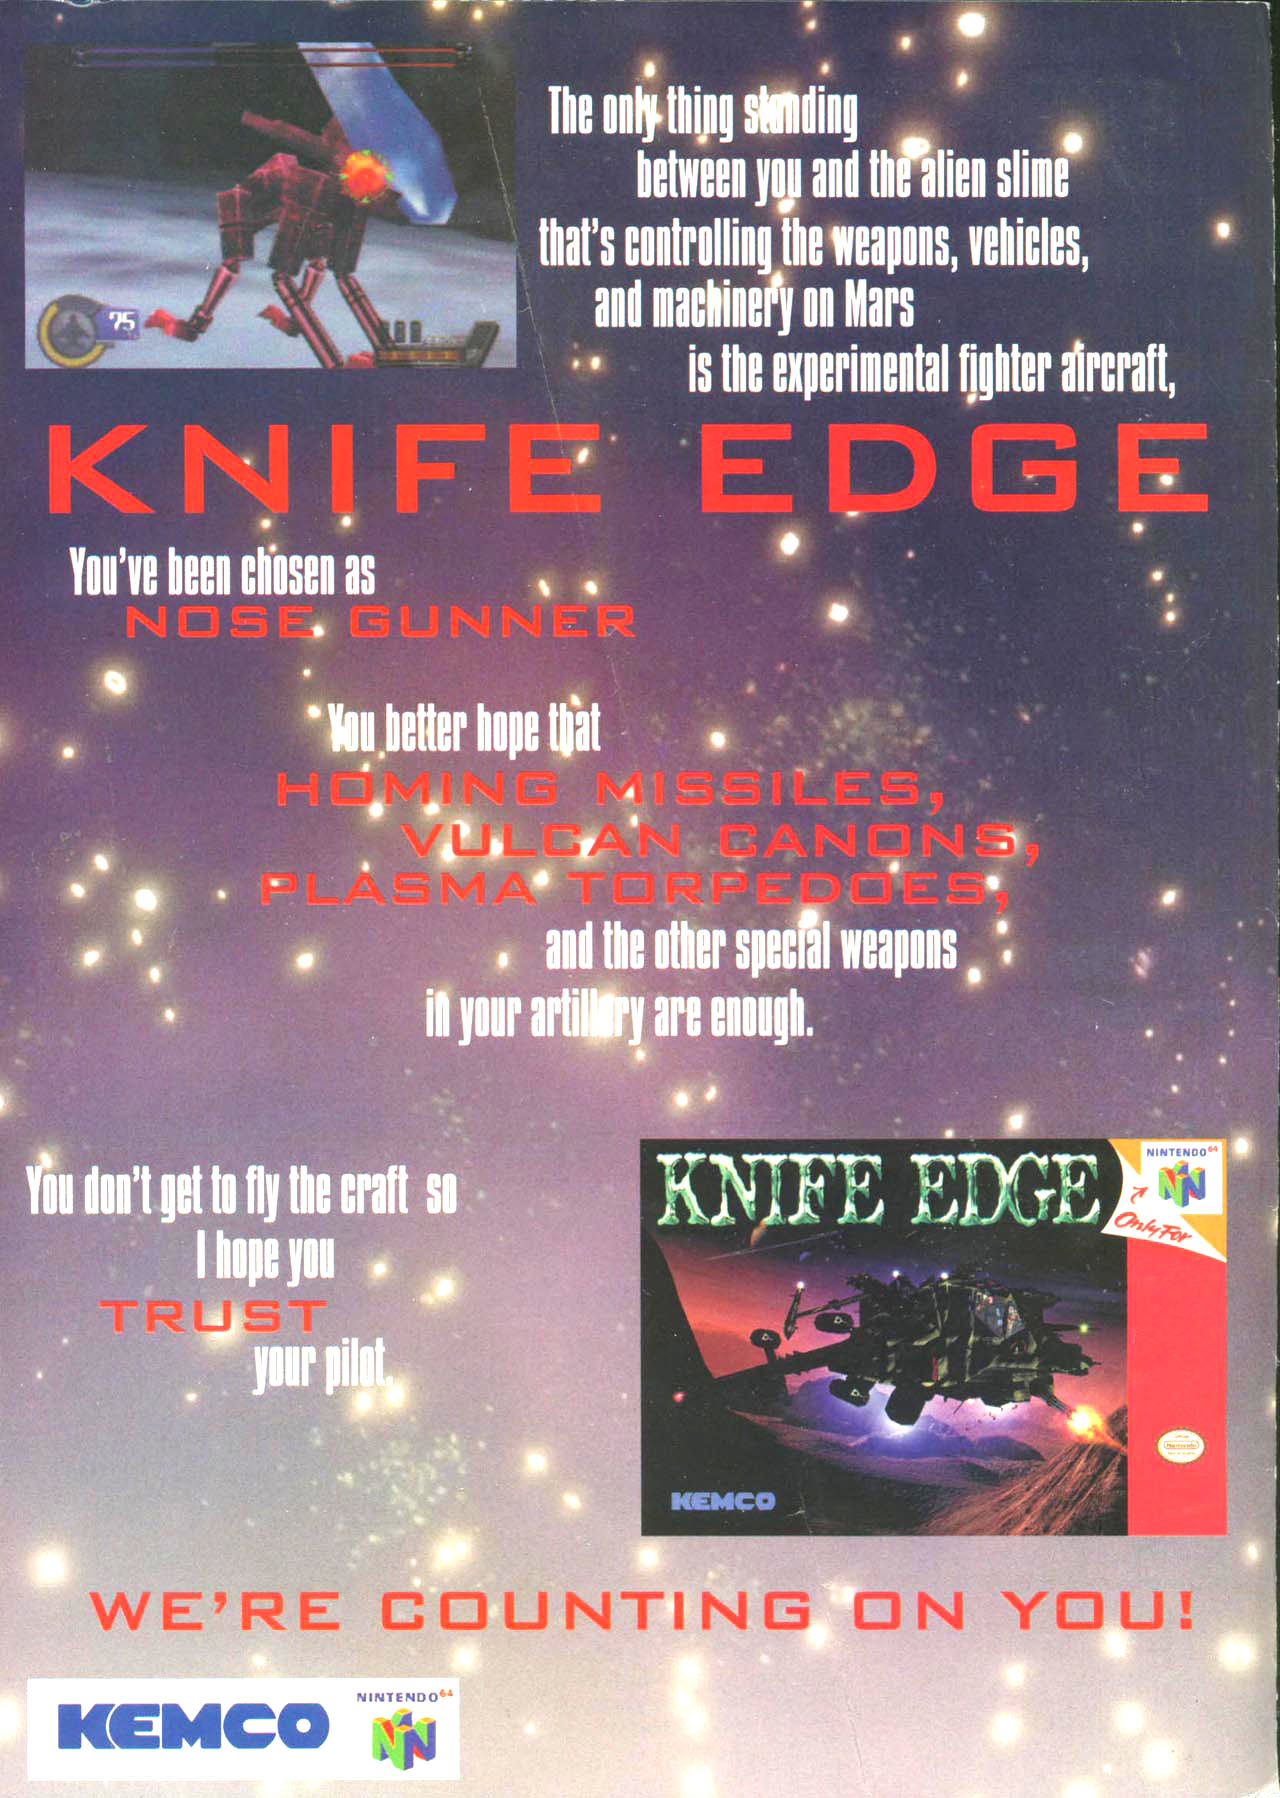 Out of the thousands of ads we have, I think this has to be among the worst I’ve seen. Knife Edge was a forgettable rail shooter where you played as […]